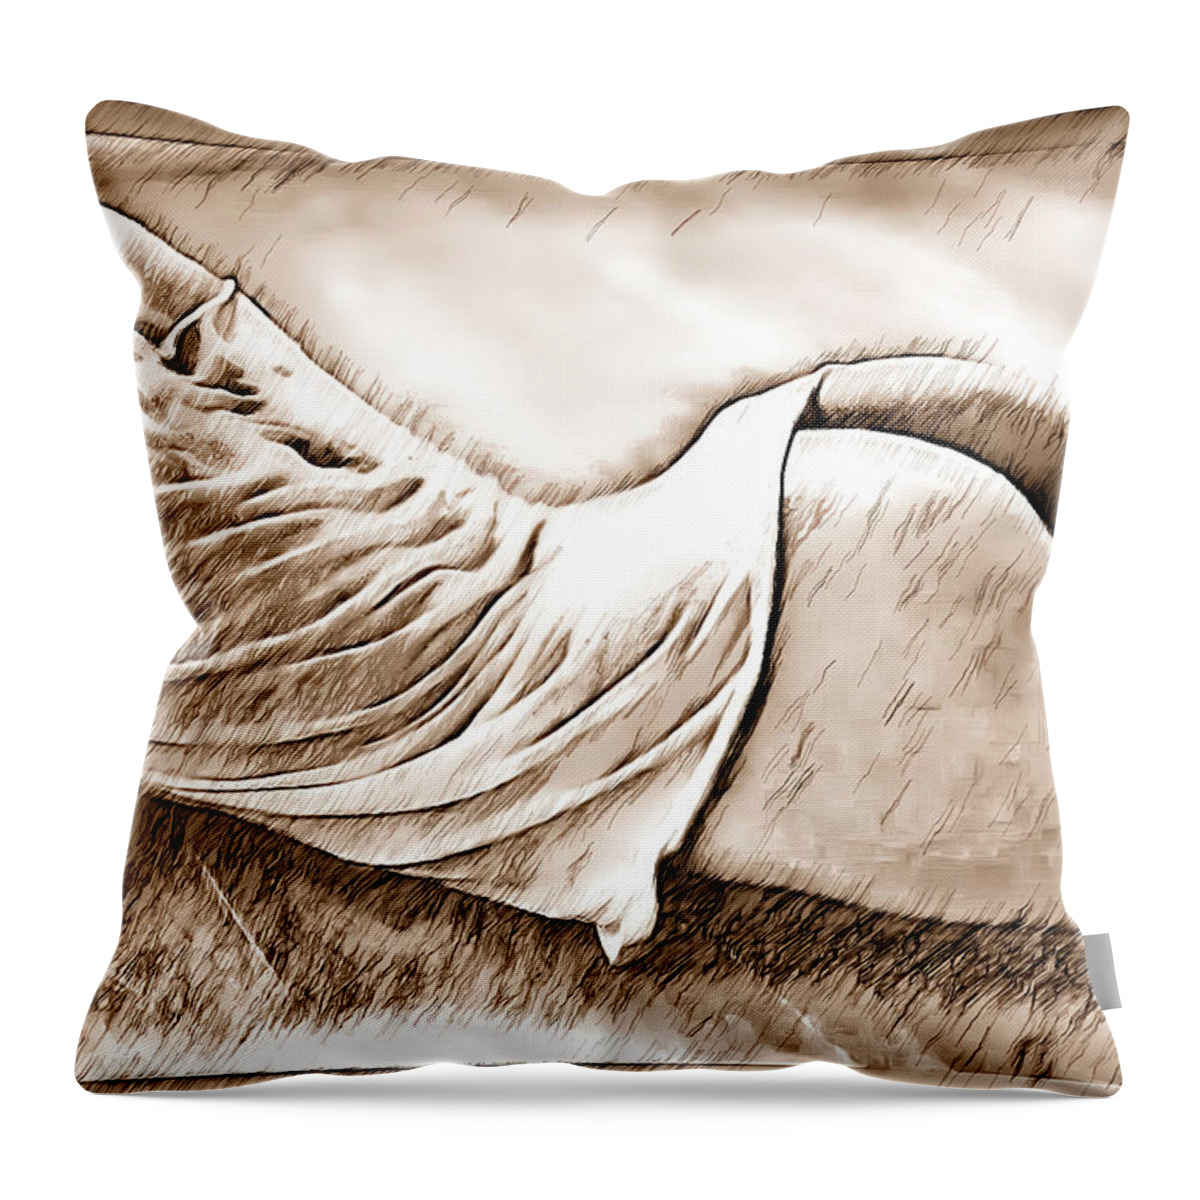 Naked Throw Pillow featuring the digital art Pencil Nude 1 by Dan Stone